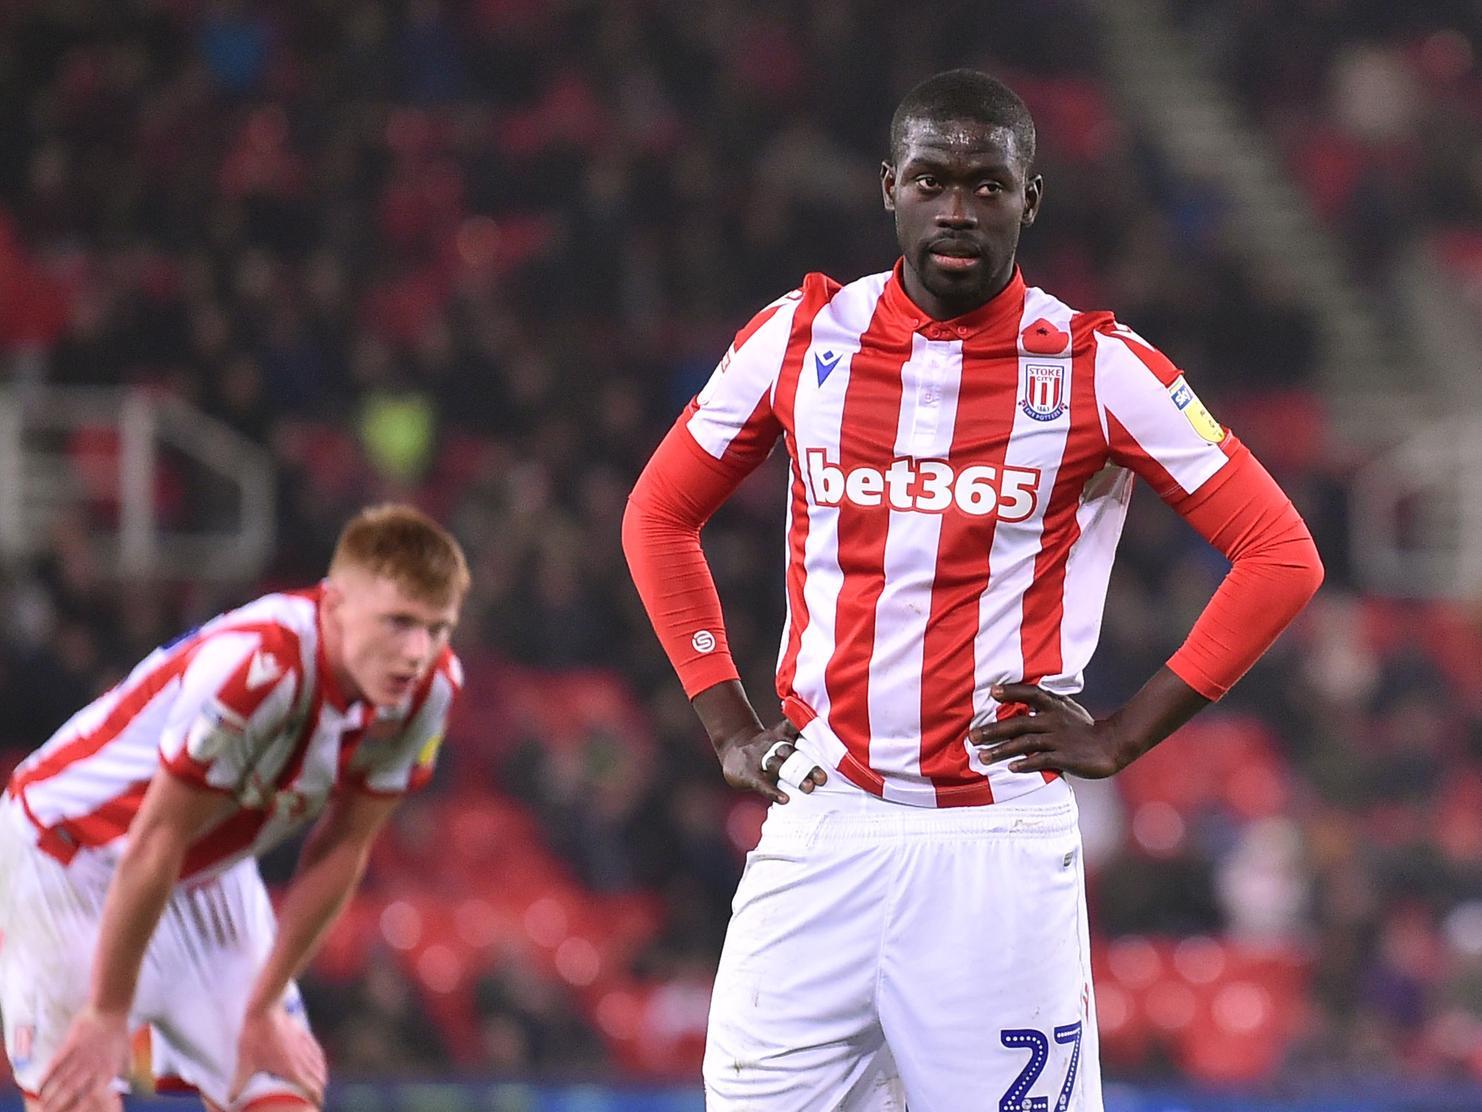 Turkish giants Galatasaray are rumoured to be eyeing a January move for Stoke City midfielder Badou Ndiaye, who impressed during a loan spell with the club last season. (Fotomac)